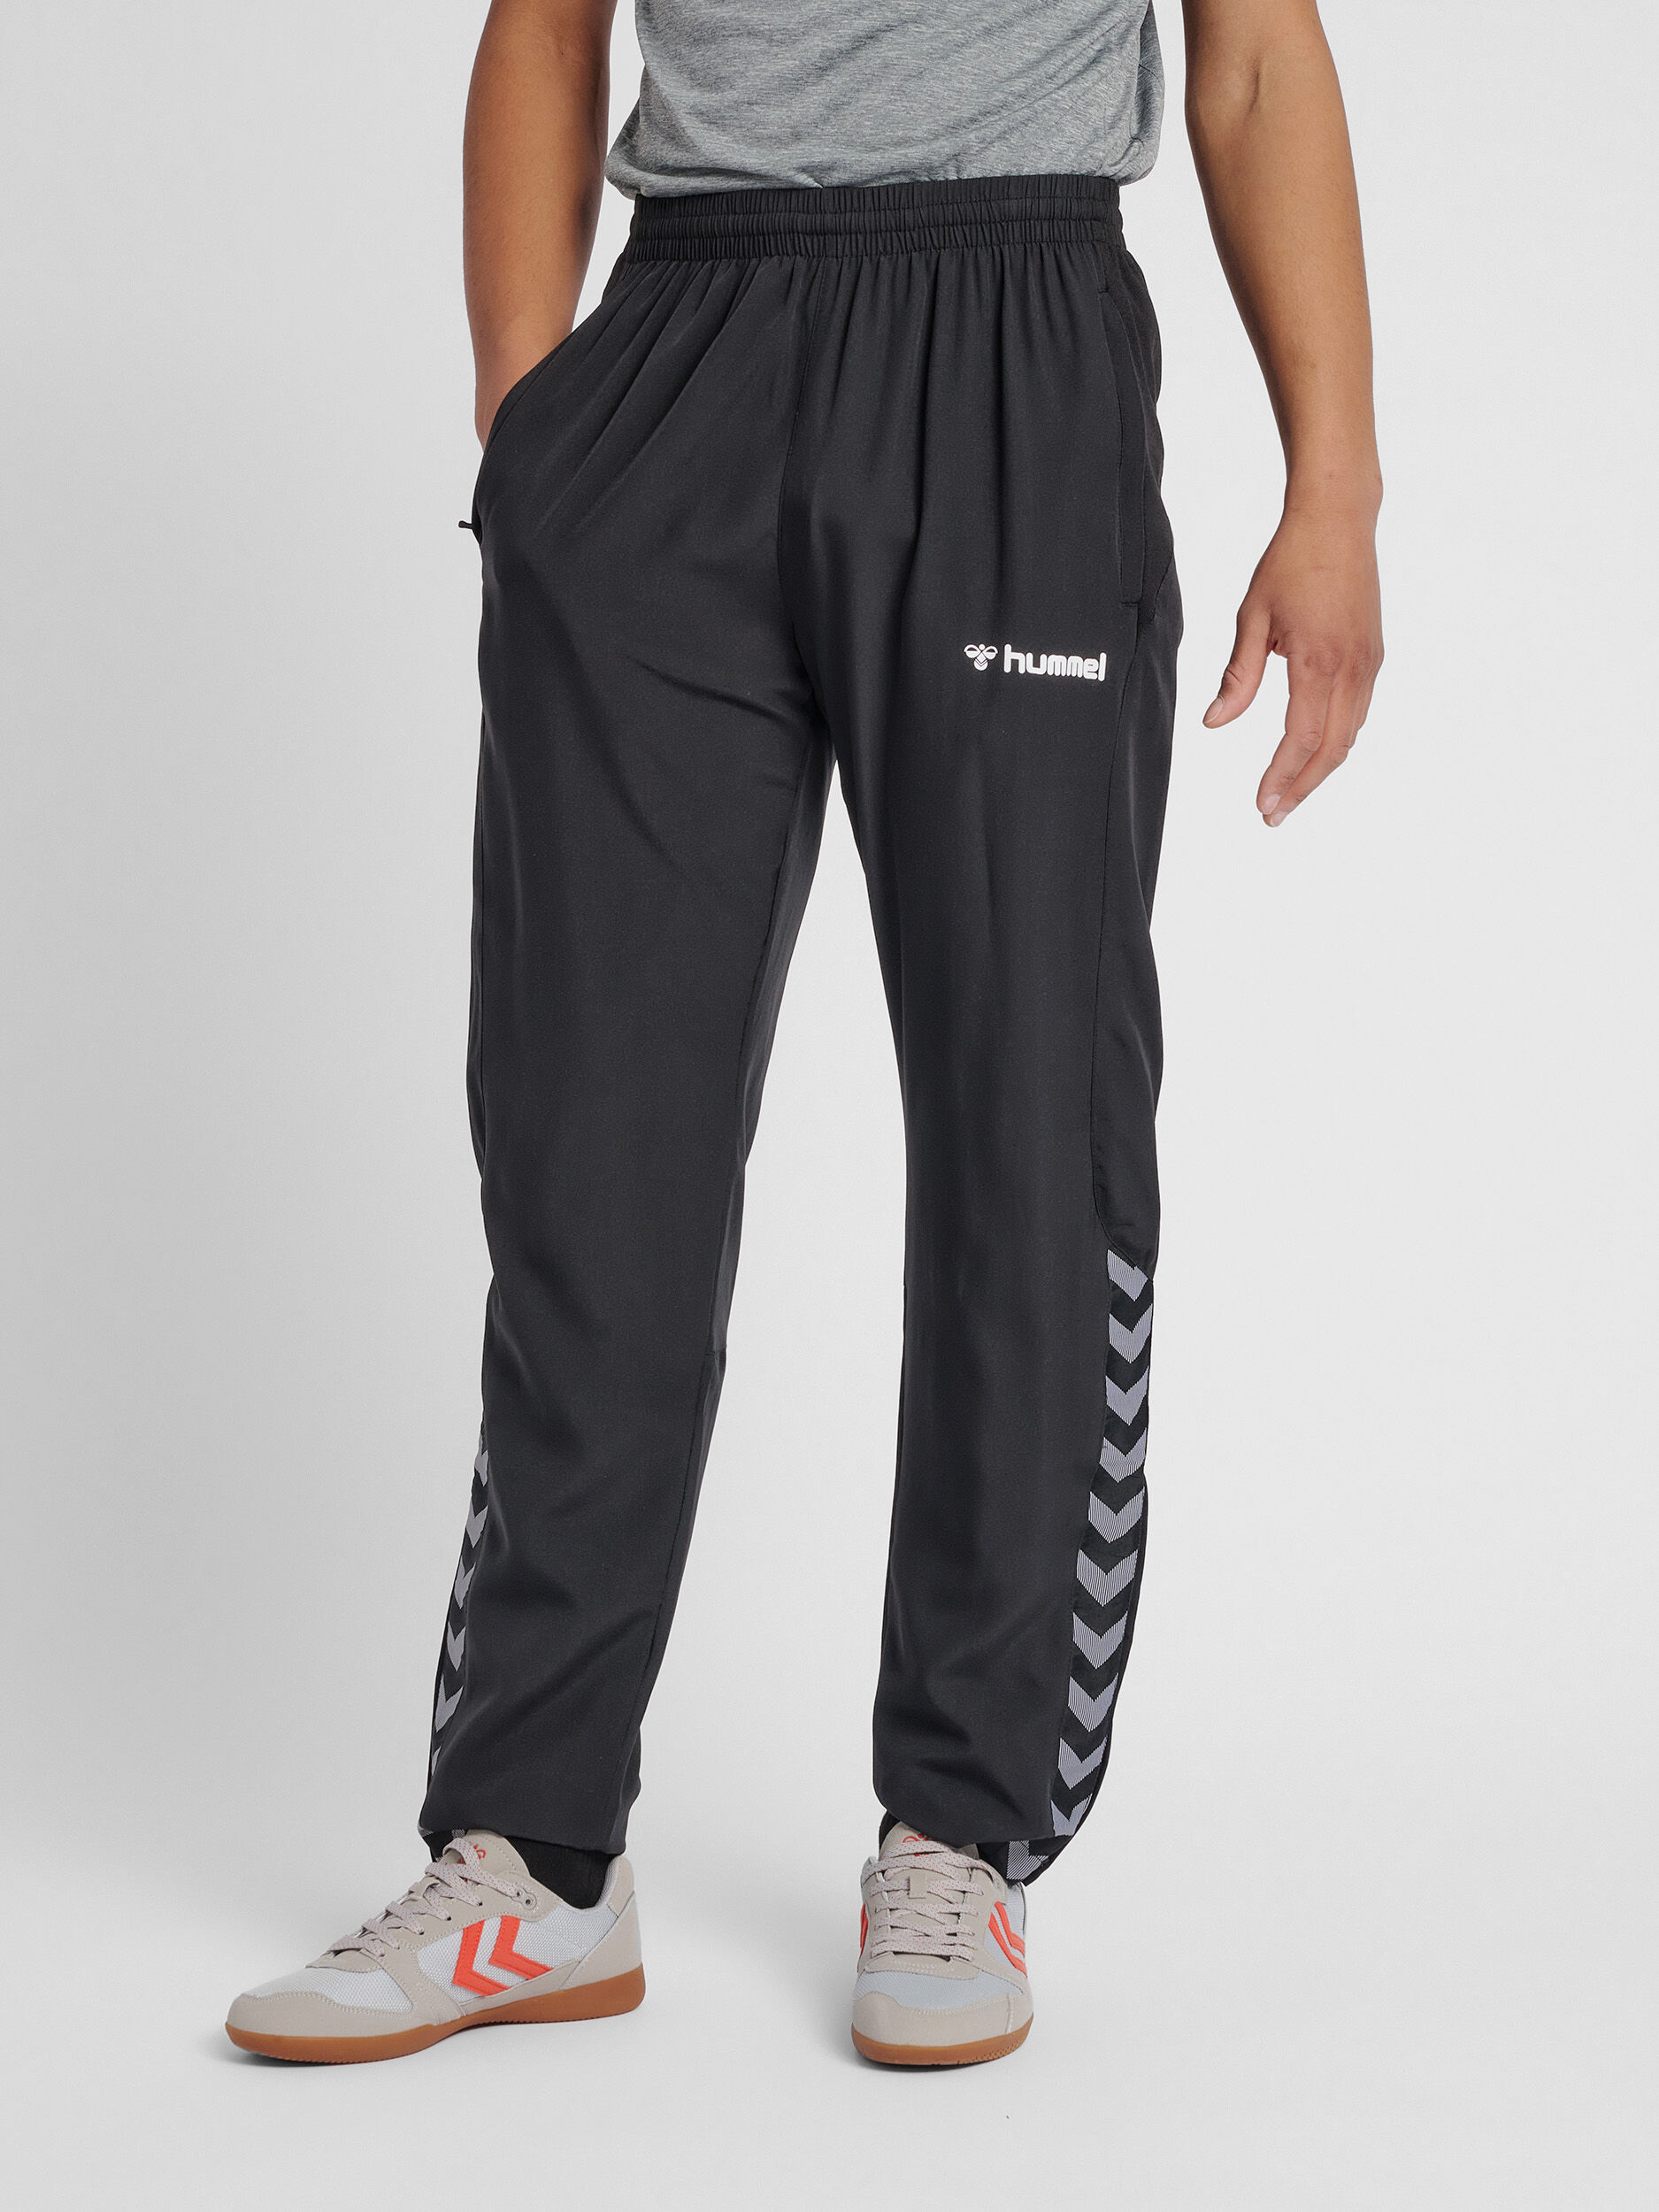 Details about   Hummel Football Soccer Mens Sports Training Pants Trousers Tracksuit Bottoms 